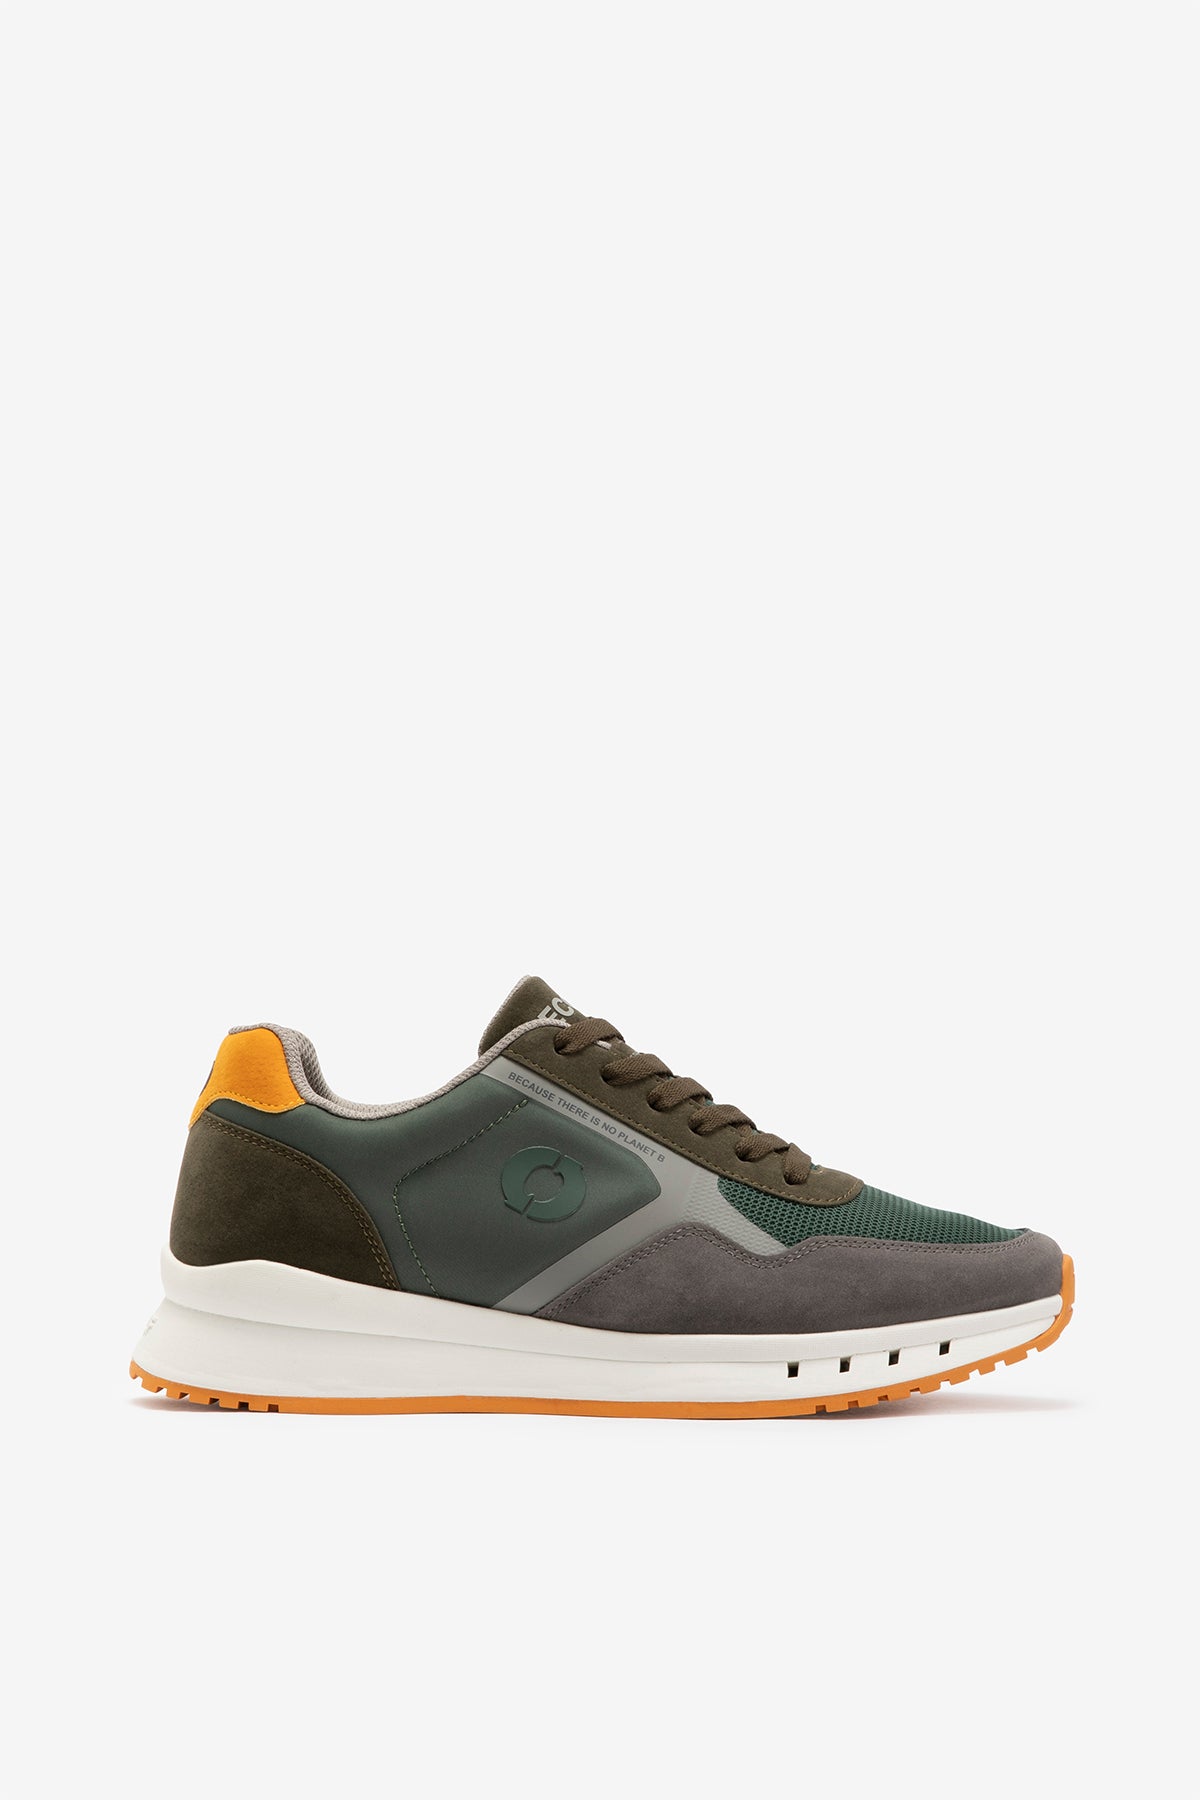 ECOALF men's trainers | Trainers and sneakers